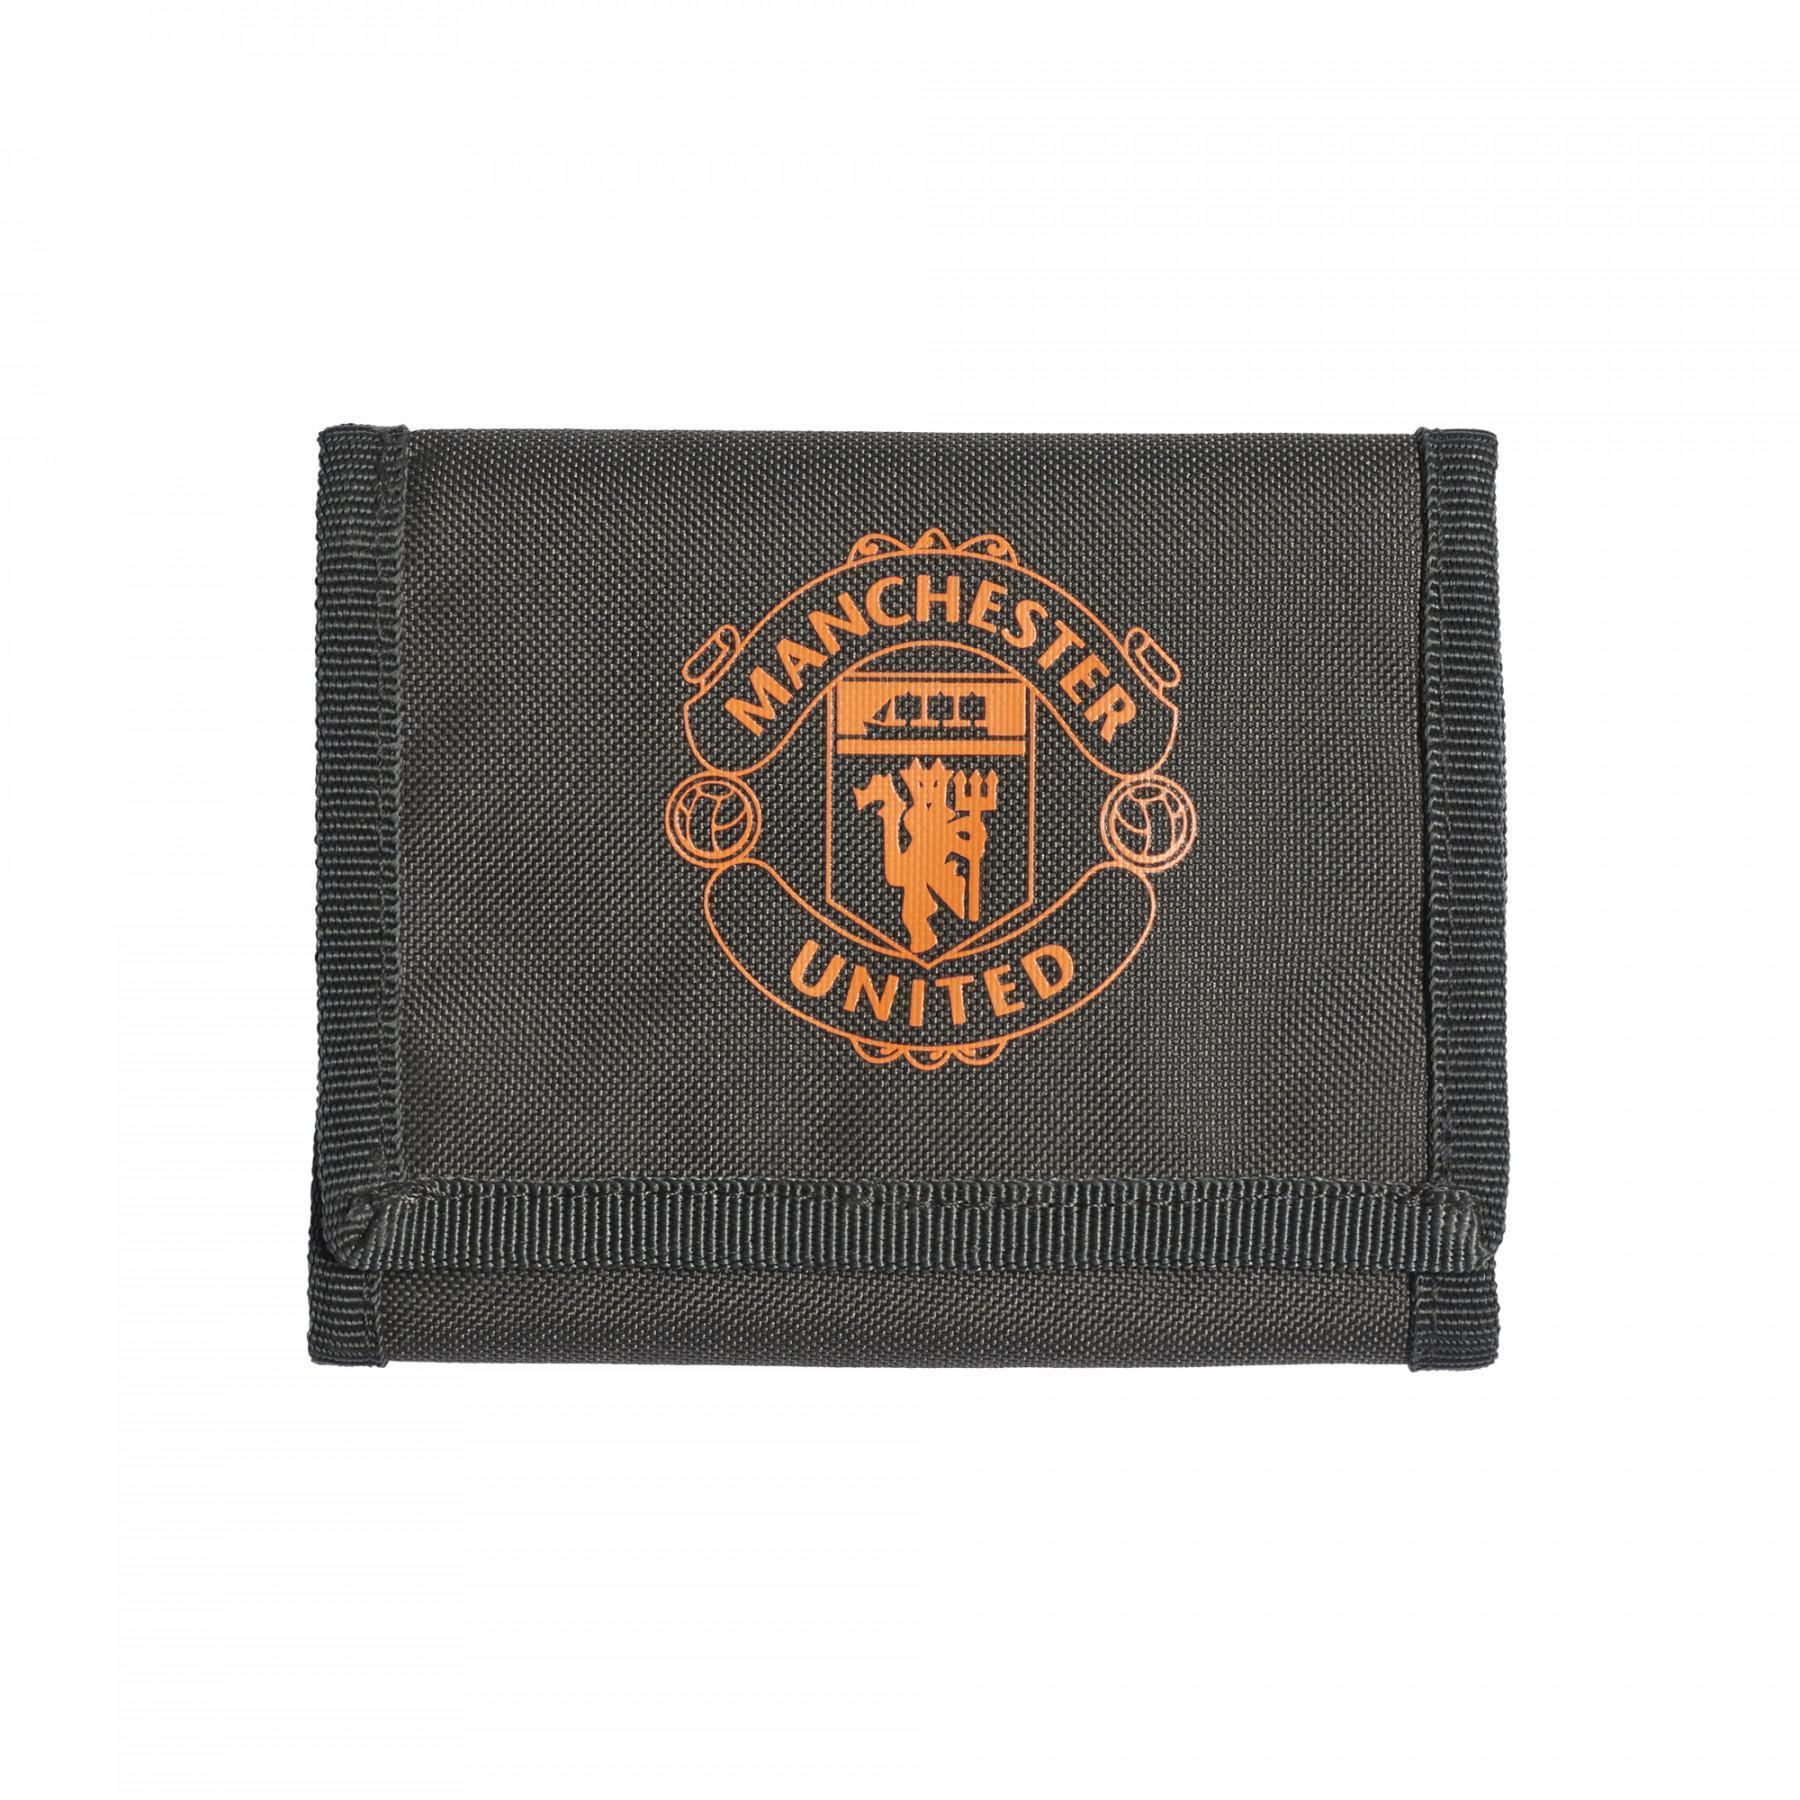 Portefeuille Manchester United